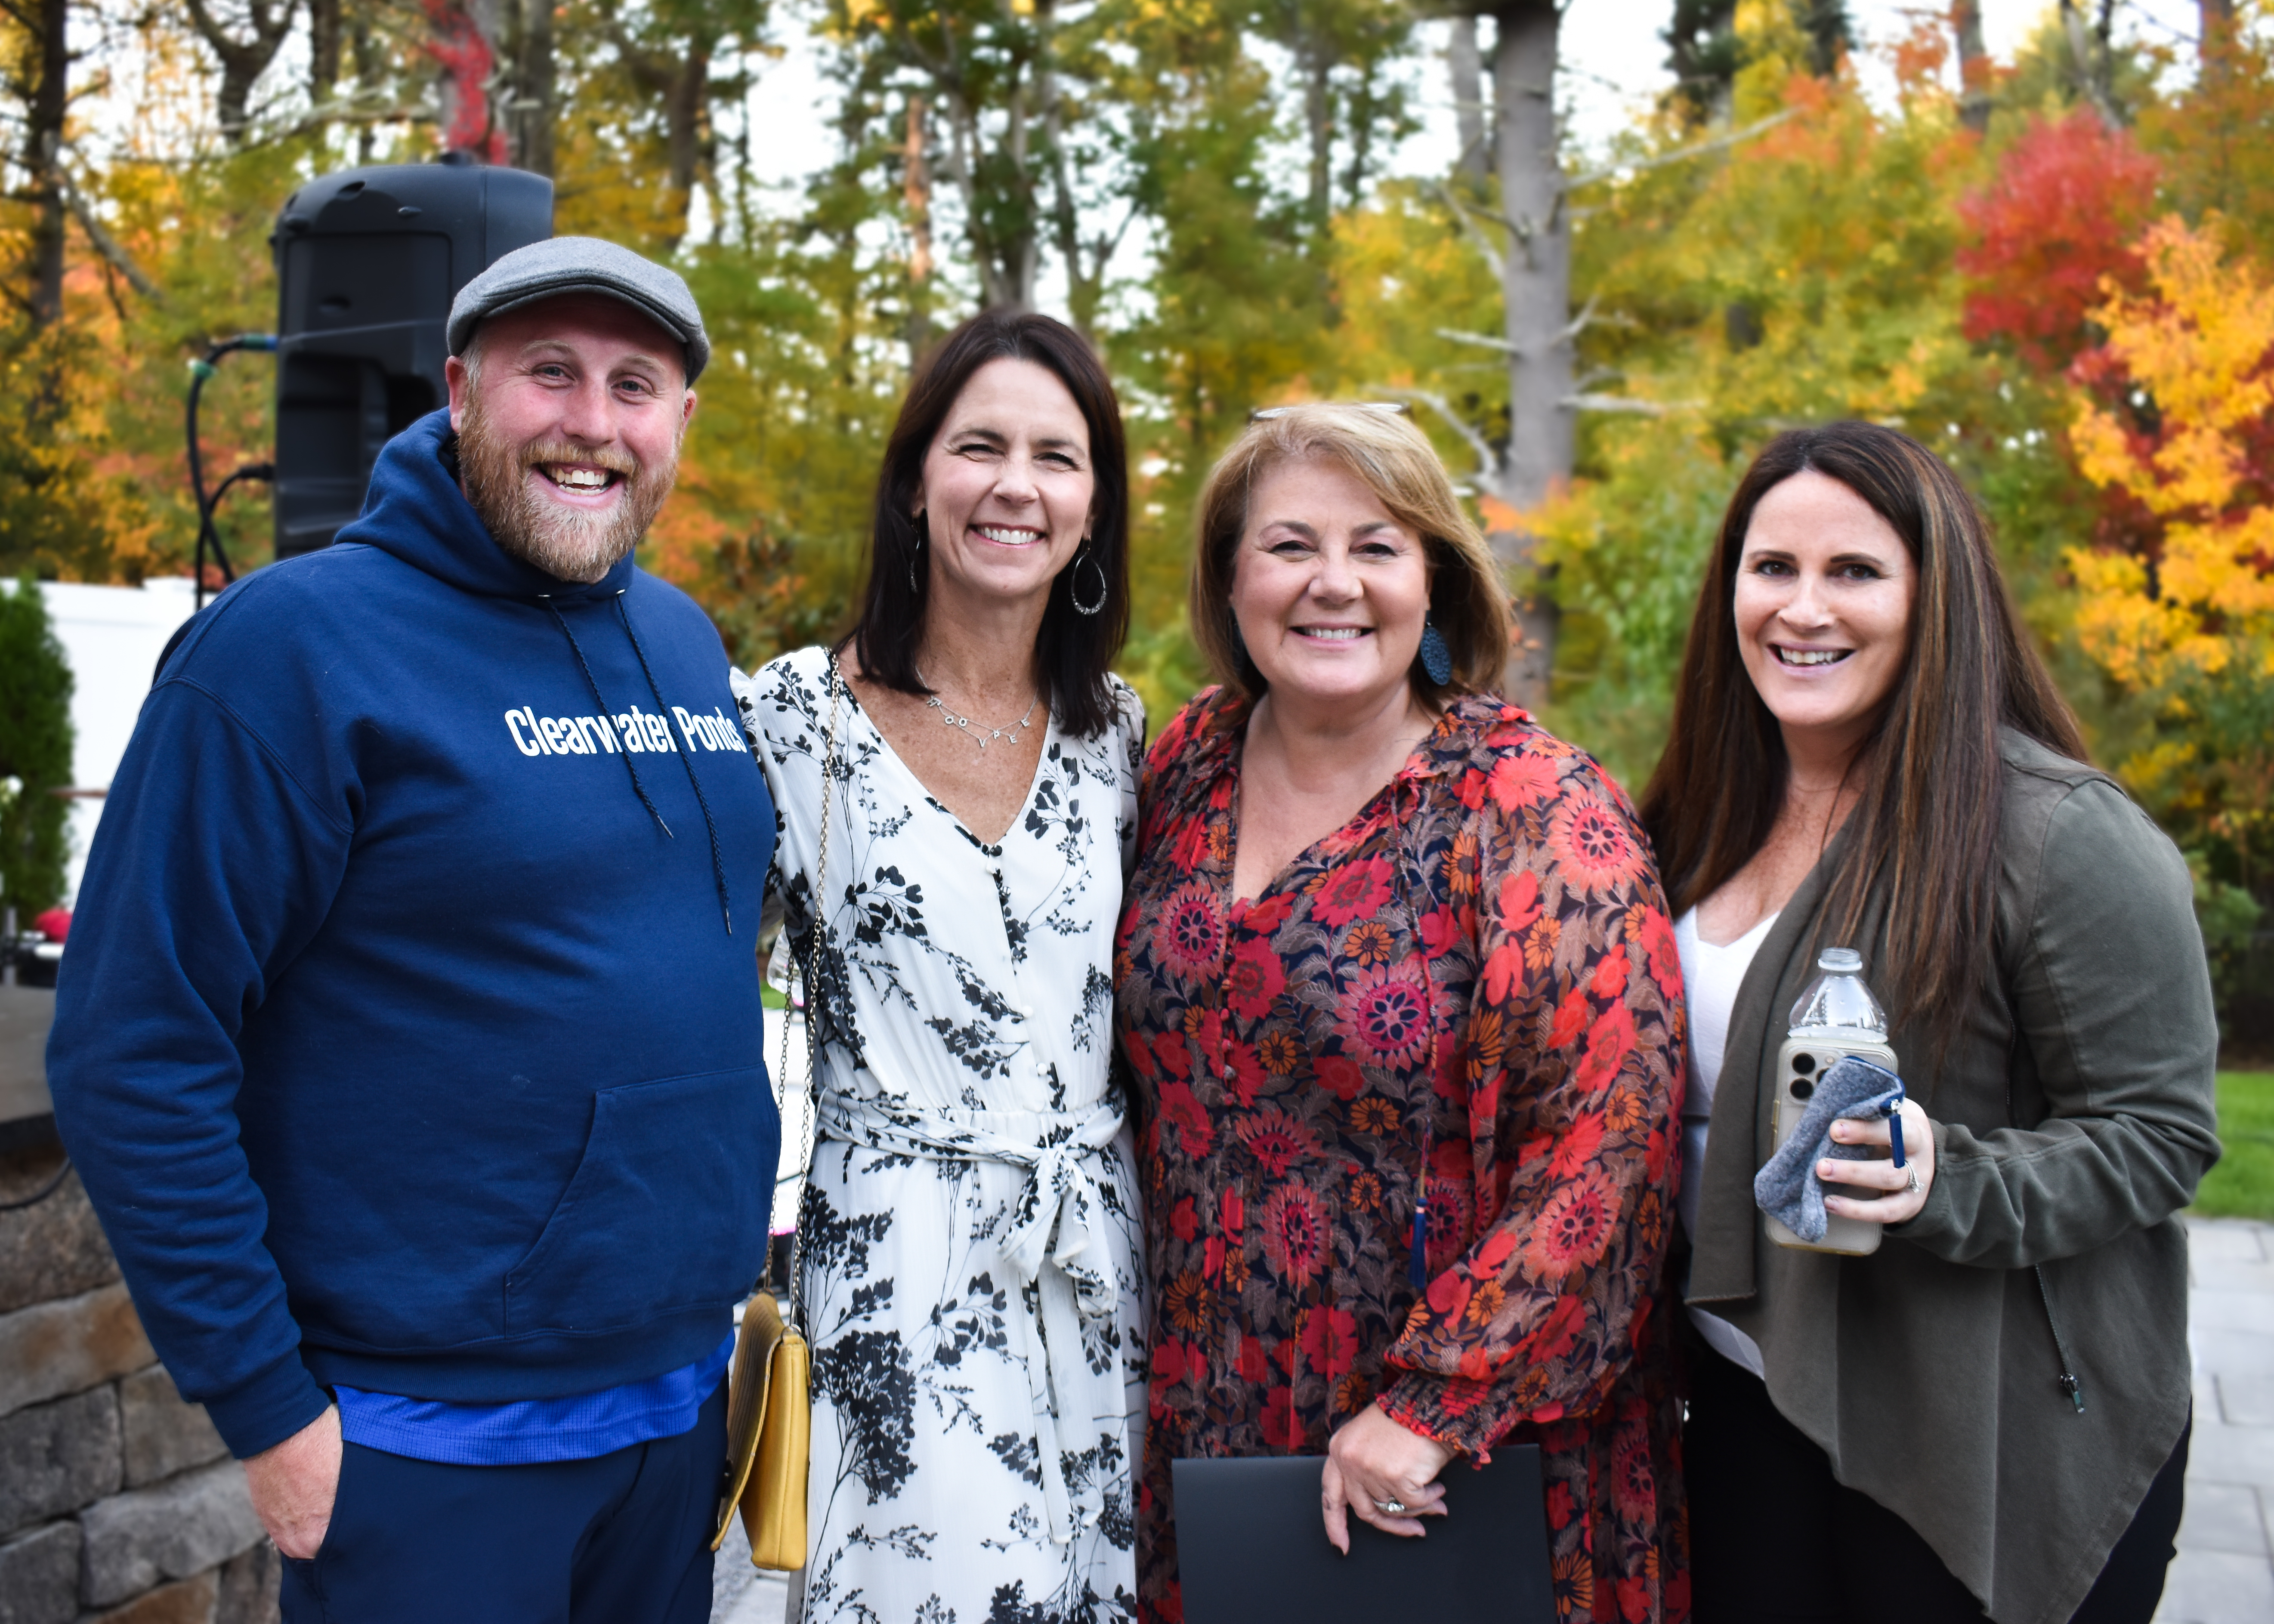 Scip & Savor for a Cure Fundraiser: The Scip & Savor for a Cure Fundraiser was held on Saturday, October 15 at the Scipione residence in Medfield, MA.